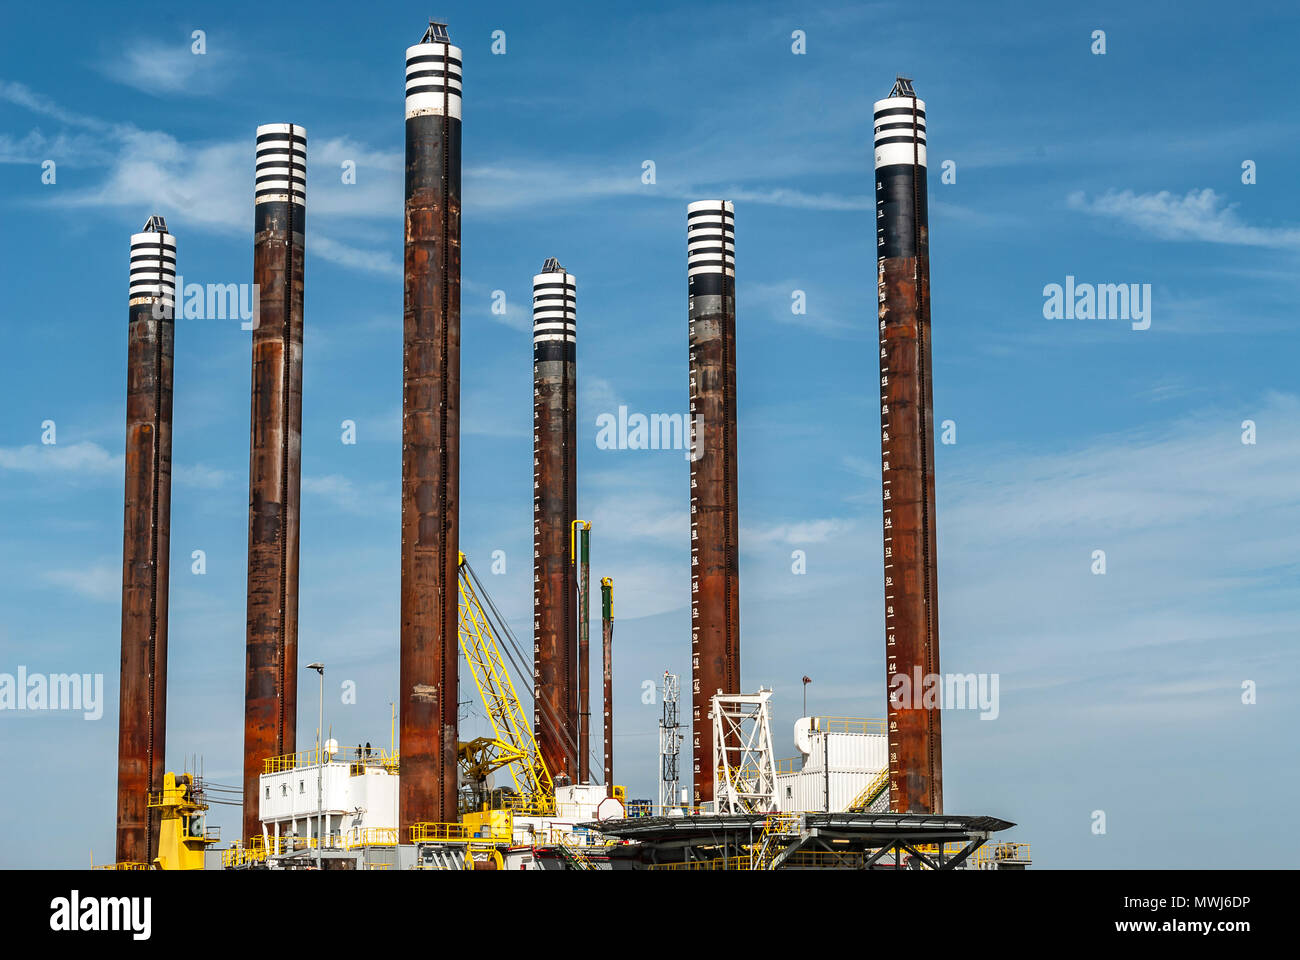 front view of an oil drilling platform Stock Photo